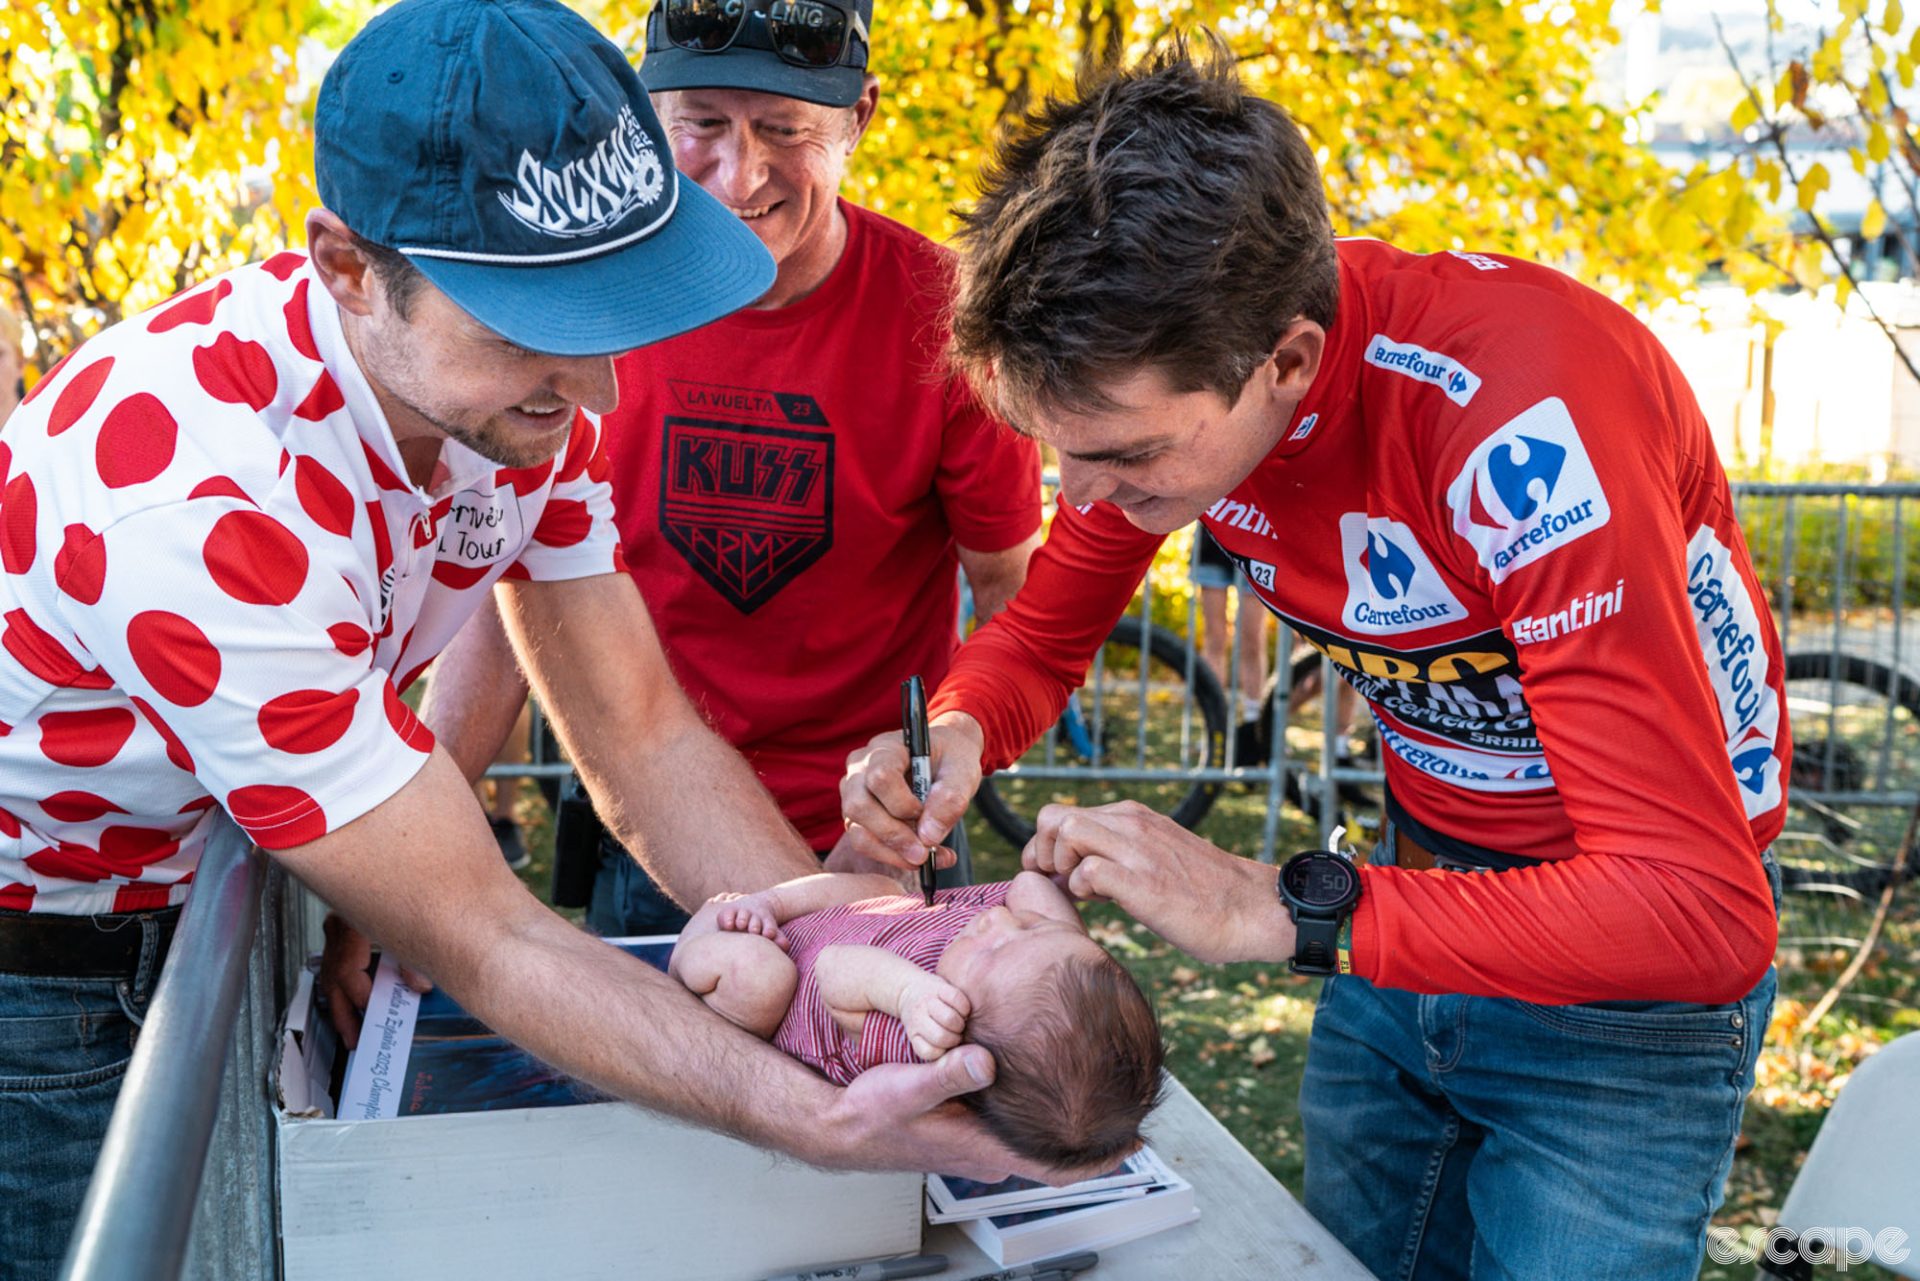 Sepp Kuss smiles as he leans over a table to sign a onesie on a small baby. The child's father is wearing a polka-dot cycling jersey from the Tour de France and holds the child out gently for Sepp's signature.